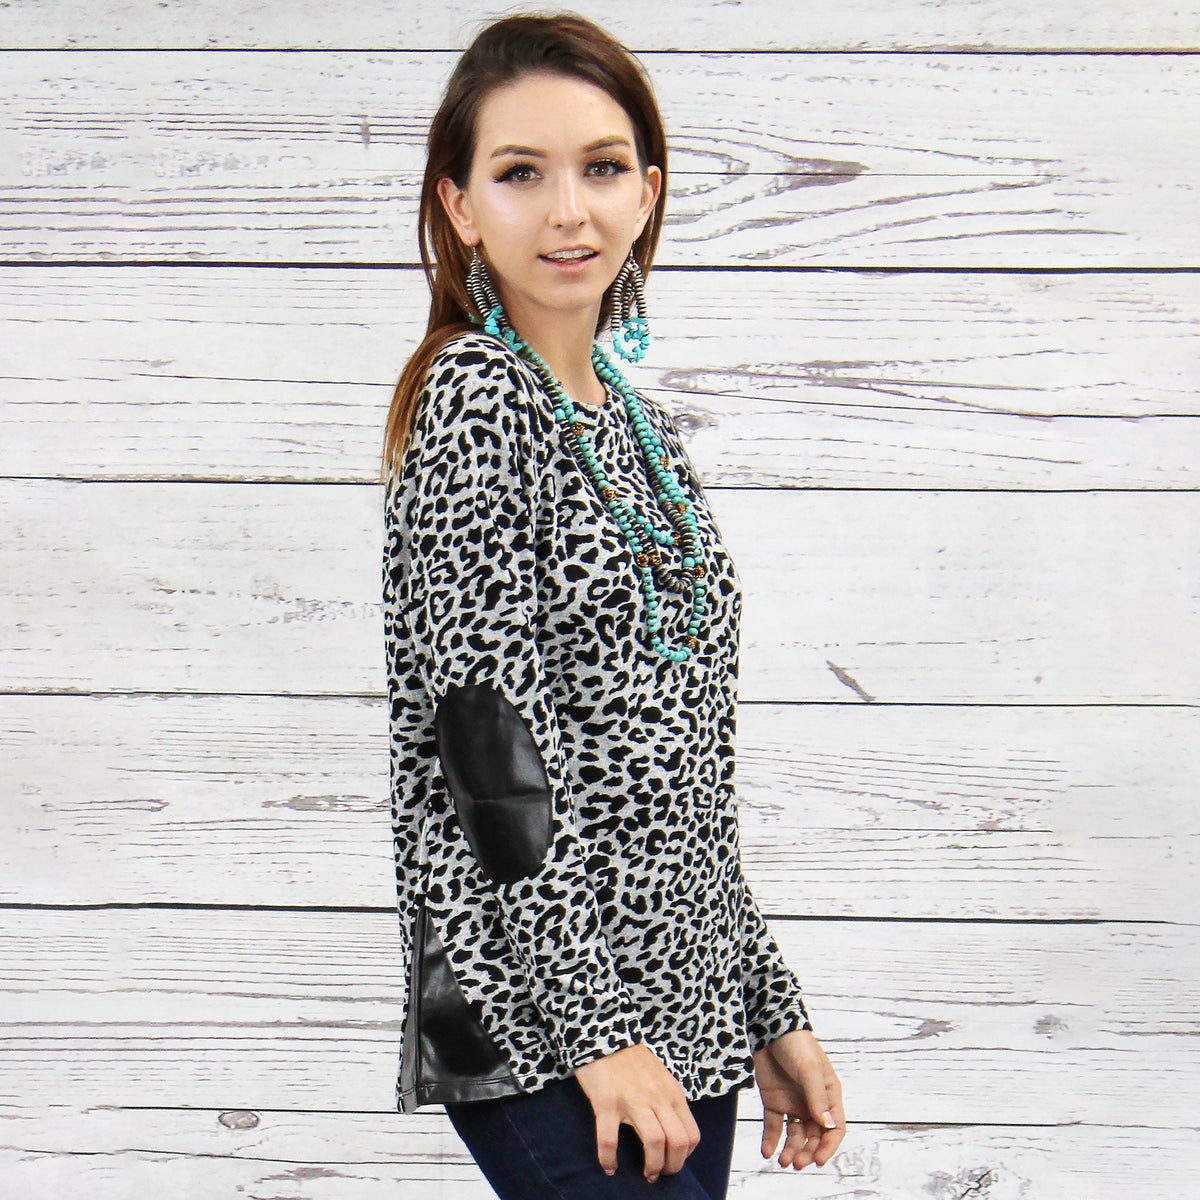 10426 - Leopard Top with Elbow Patches - Grey